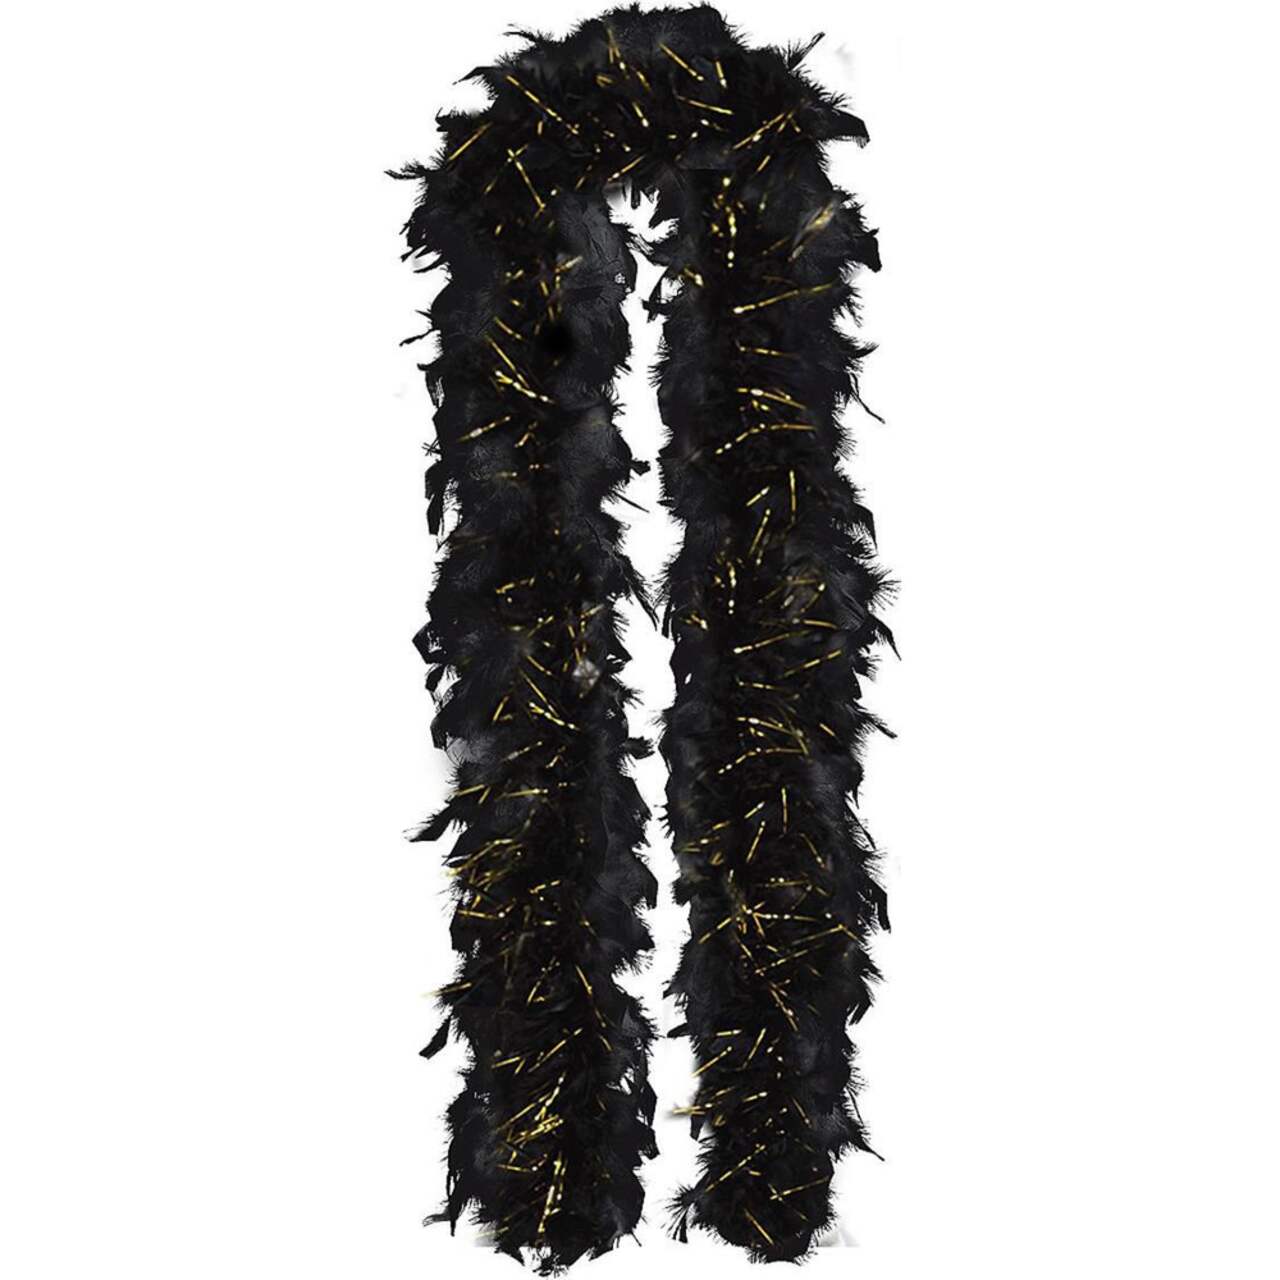 https://media-www.canadiantire.ca/product/seasonal-gardening/party-city-everyday/pc-year-round-themed-supplies-decor/8428476/72in-b-g-tinsel-boa-glitz-glam-cd563766-ff43-4b34-98a2-10564d099b45.png?imdensity=1&imwidth=640&impolicy=mZoom